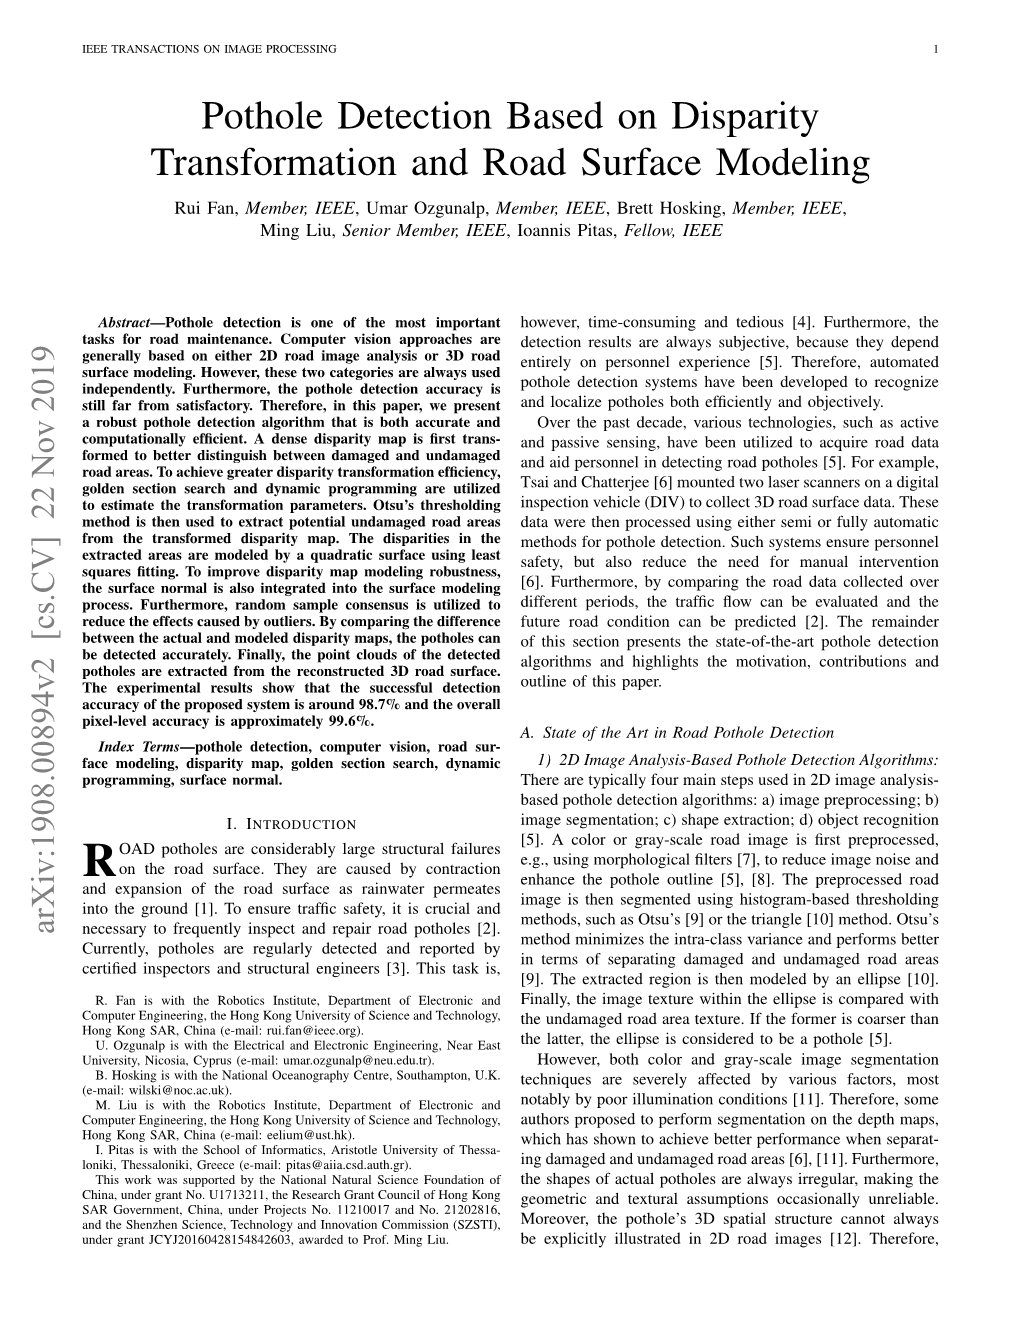 Pothole Detection Based on Disparity Transformation and Road Surface